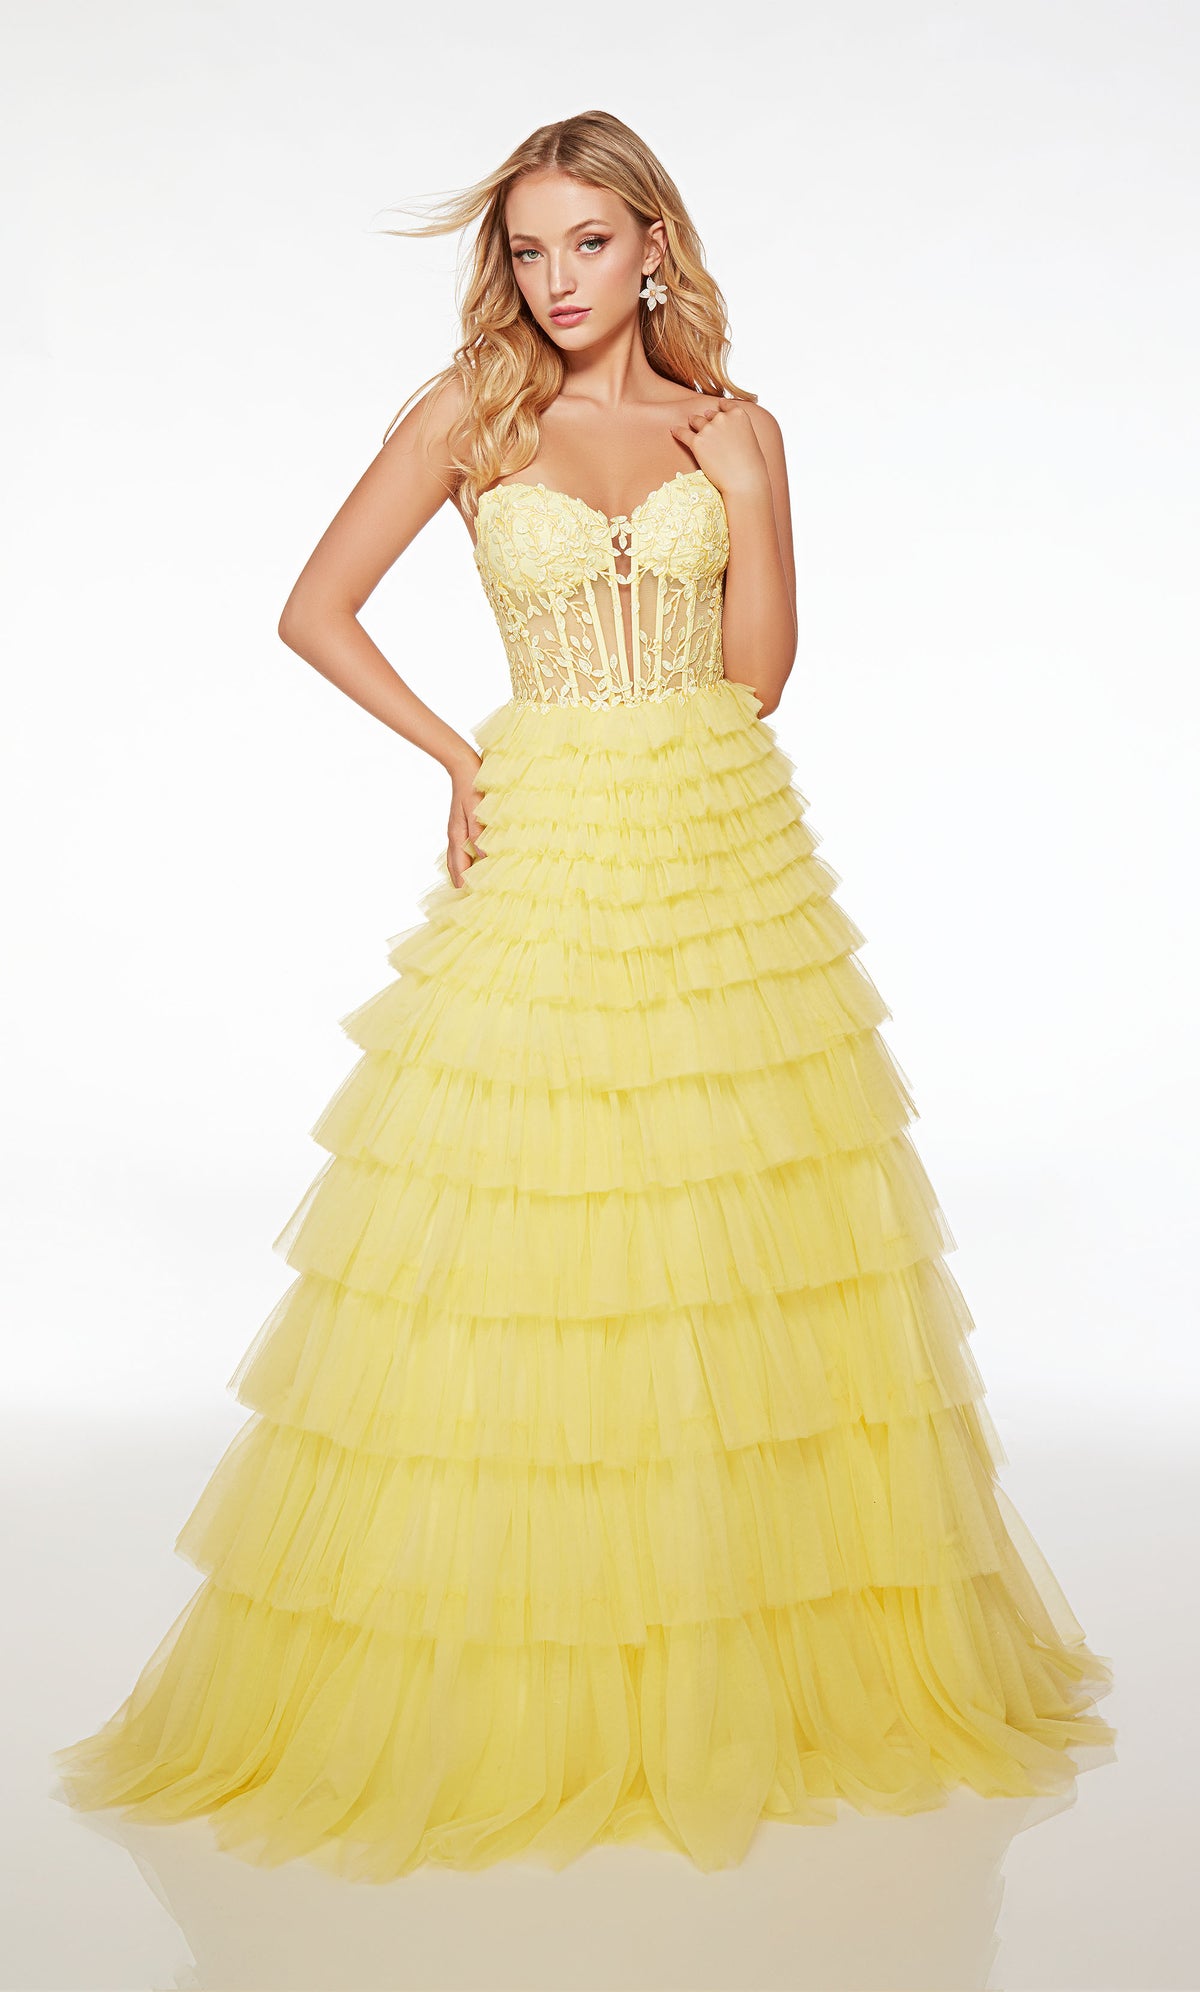 Dreamy yellow prom dress with an sheer lace strapless corset top and an tiered tulle skirt for an romantic and enchanting look.